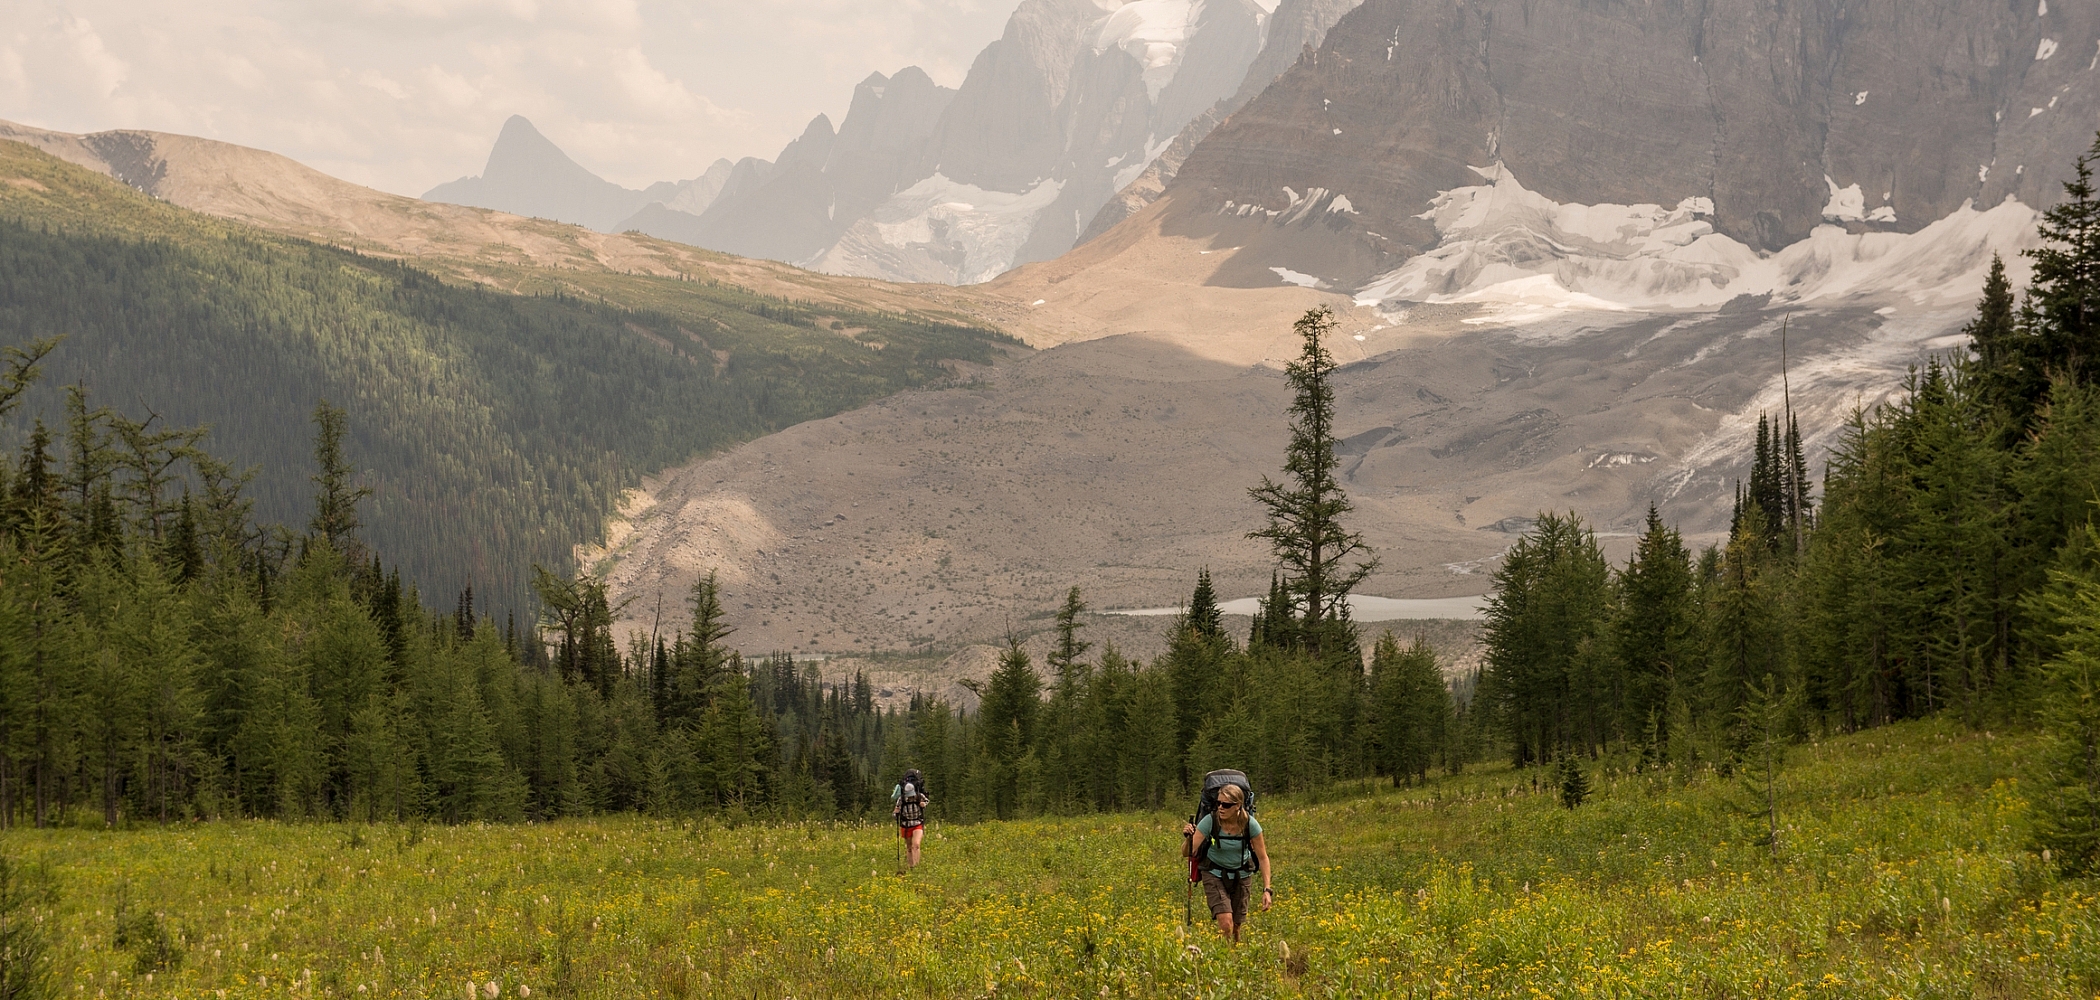 Two people with big backpacks walk toward the camera through a grassy field. Behind them is a ring of evergreen trees, and beyond those are rugged mountain peaks and glaciers.